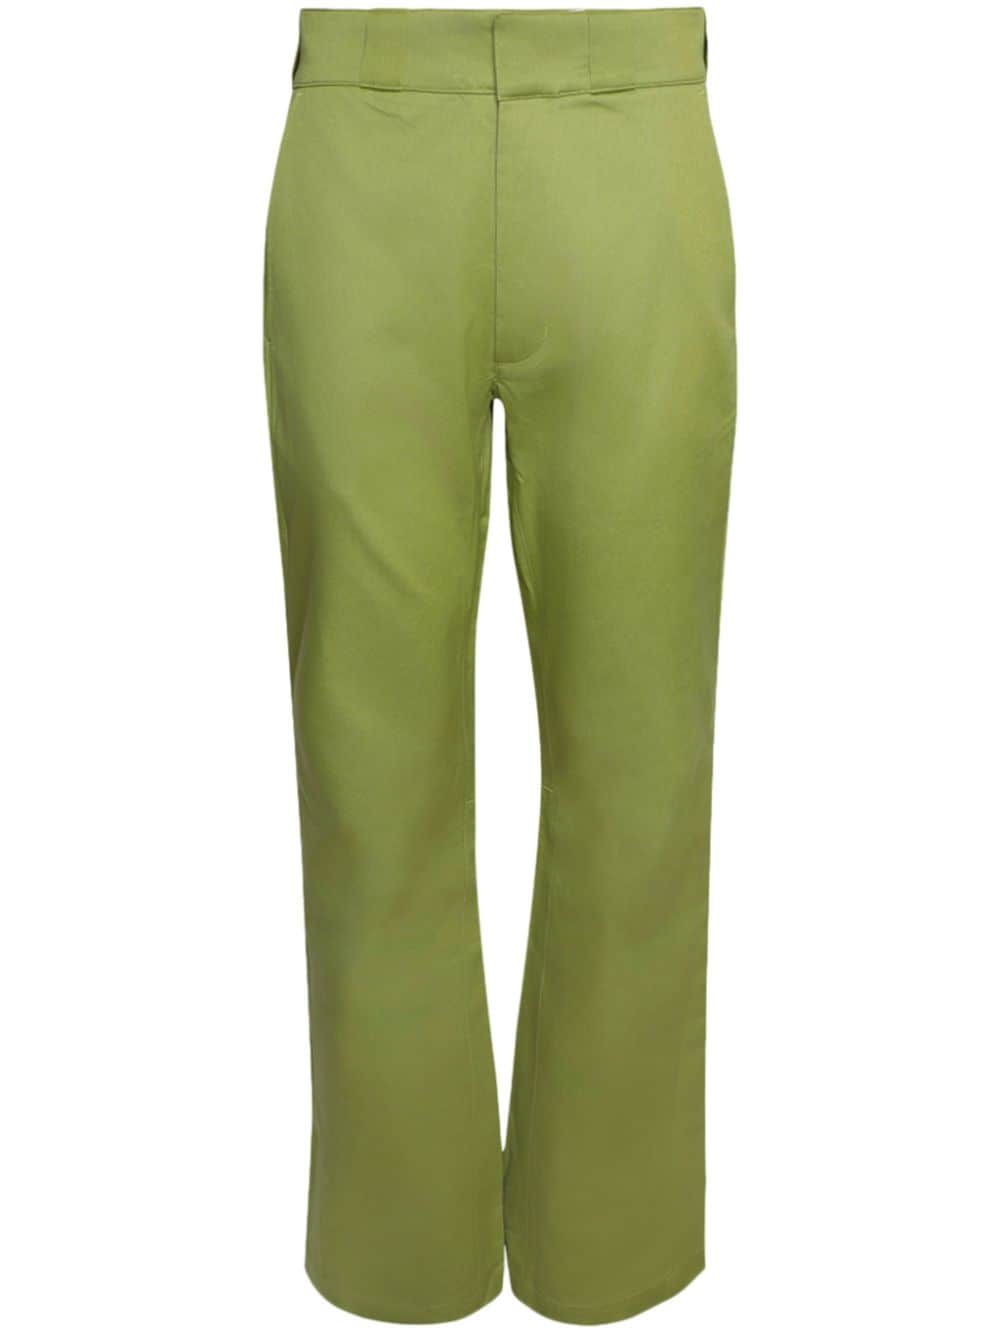 GALLERY DEPT. La Chino Flares trousers - Green von GALLERY DEPT.